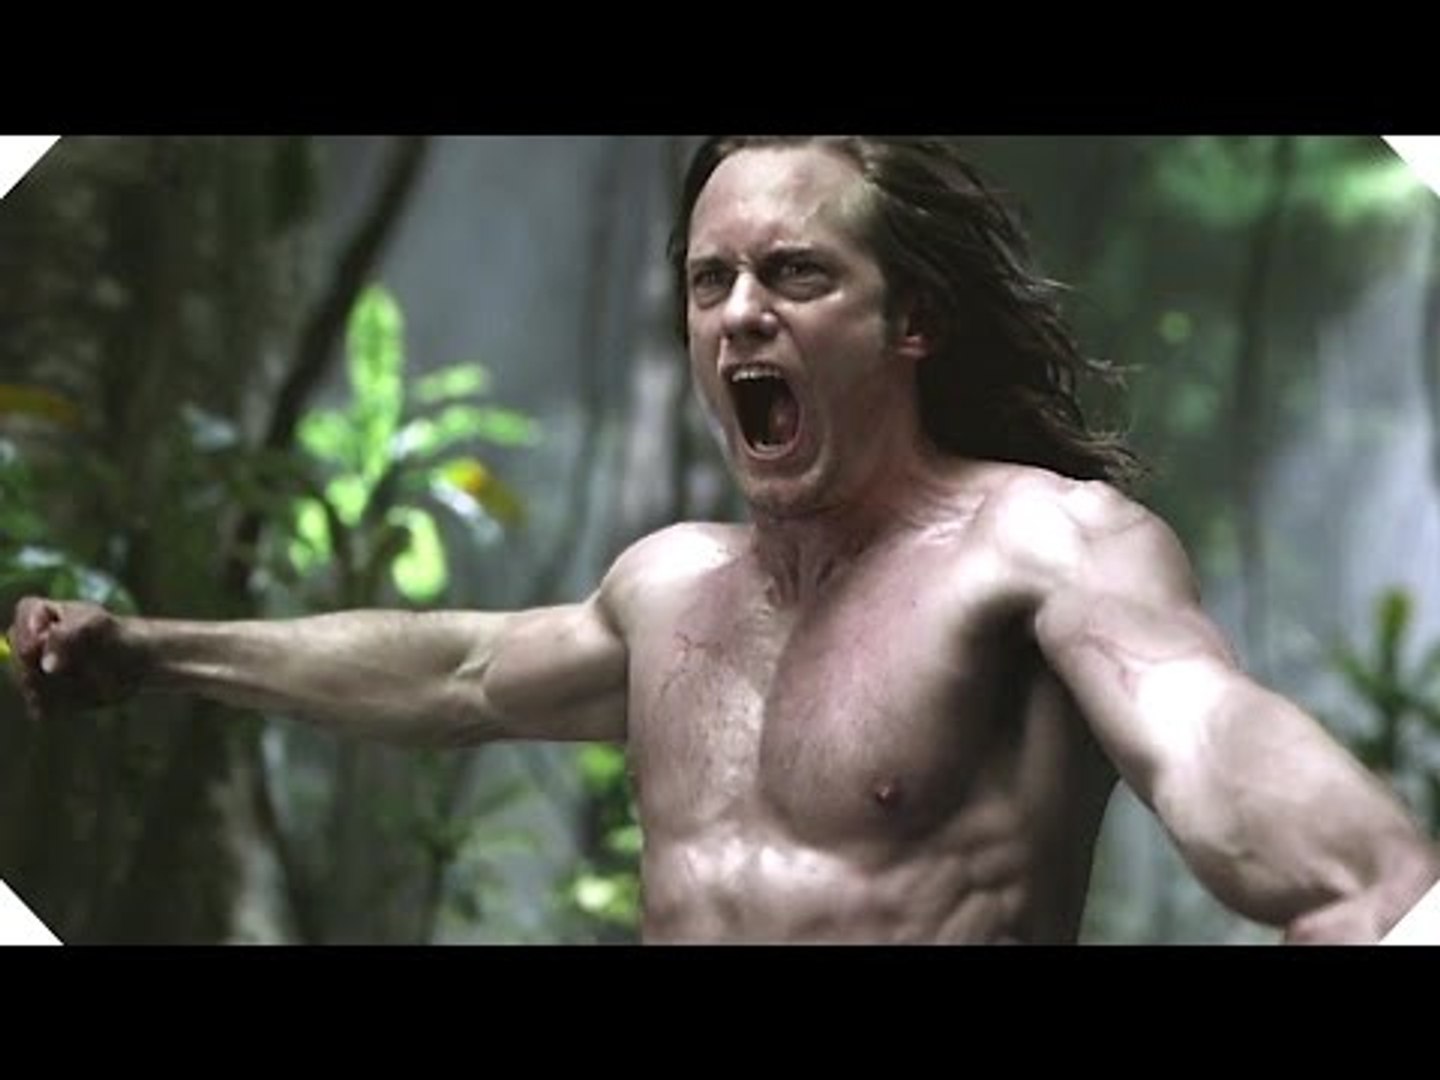 THE LEGEND OF TARZAN - ALL the Movie Clips (2016) - video Dailymotion